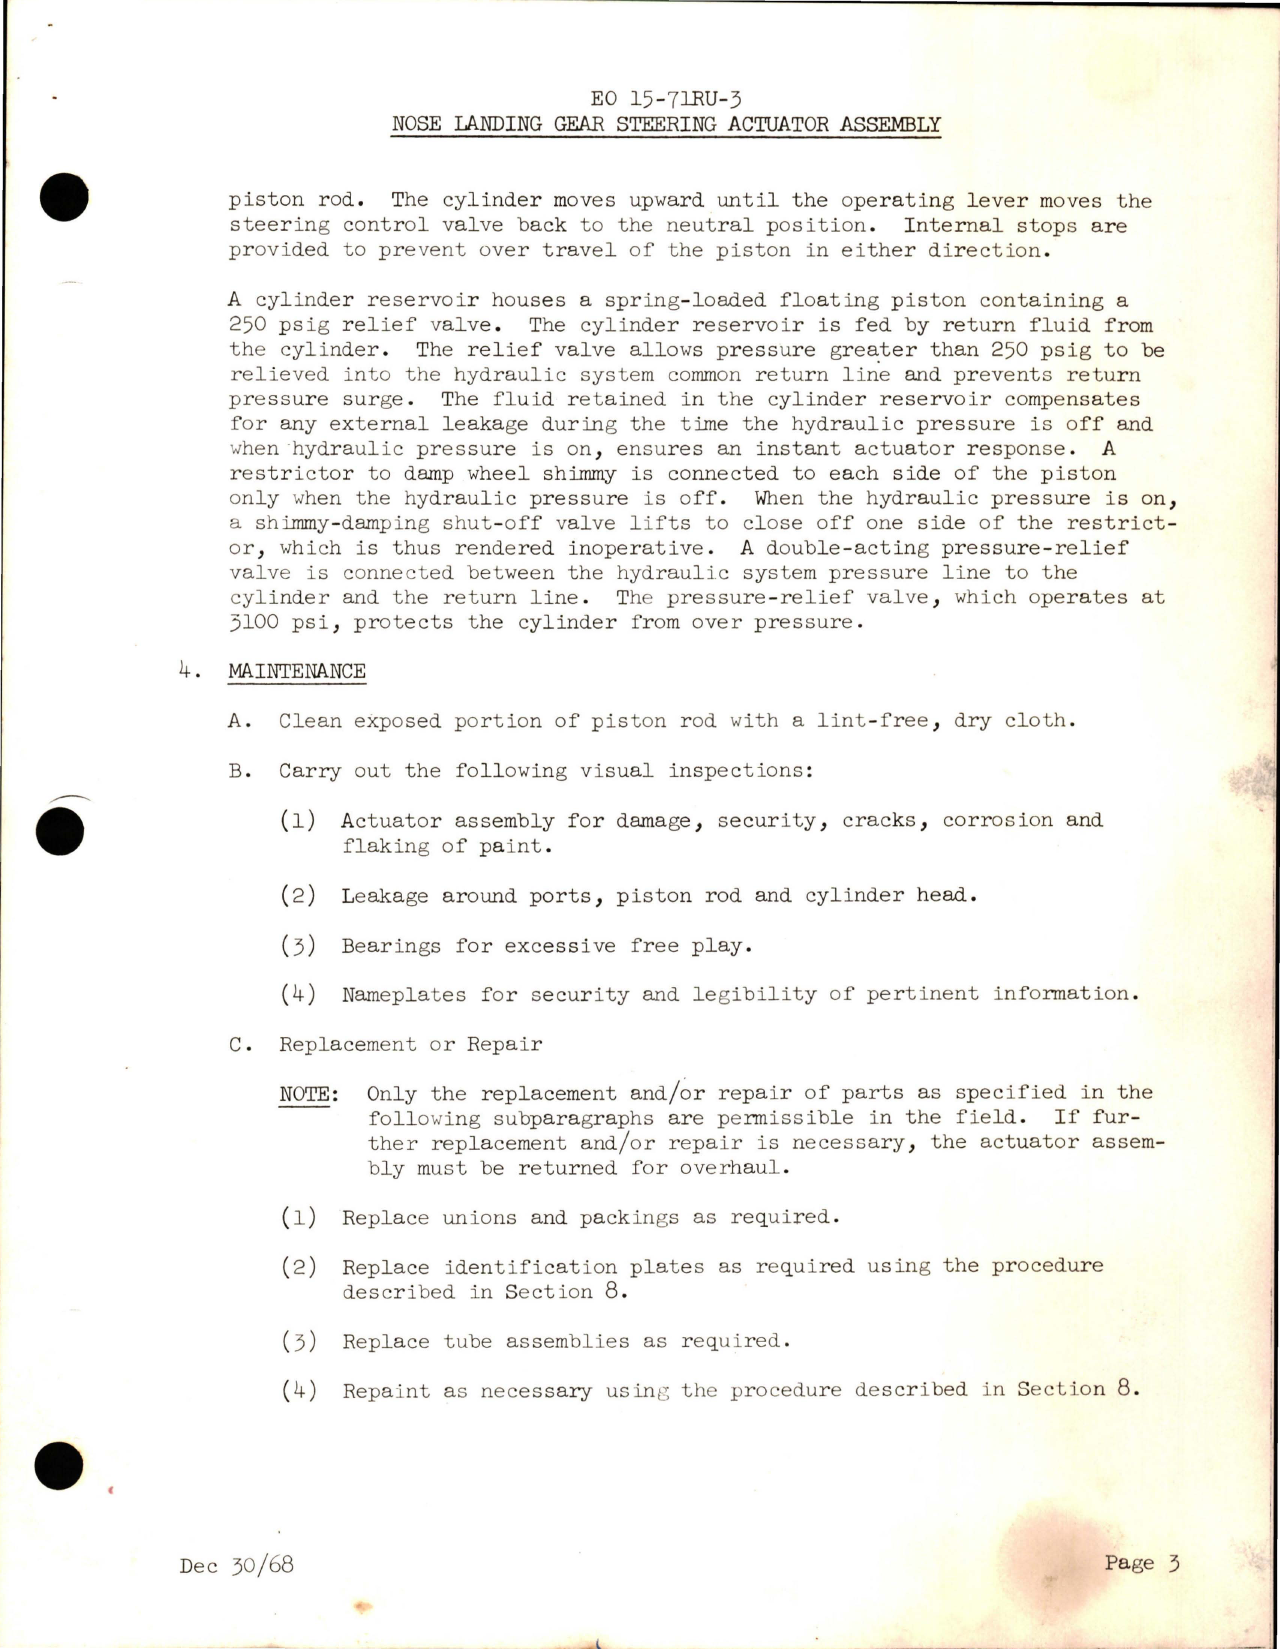 Sample page 7 from AirCorps Library document: Handbook with Part List for Nose Landing Gear Steering Actuator Assembly - Part 9200-9